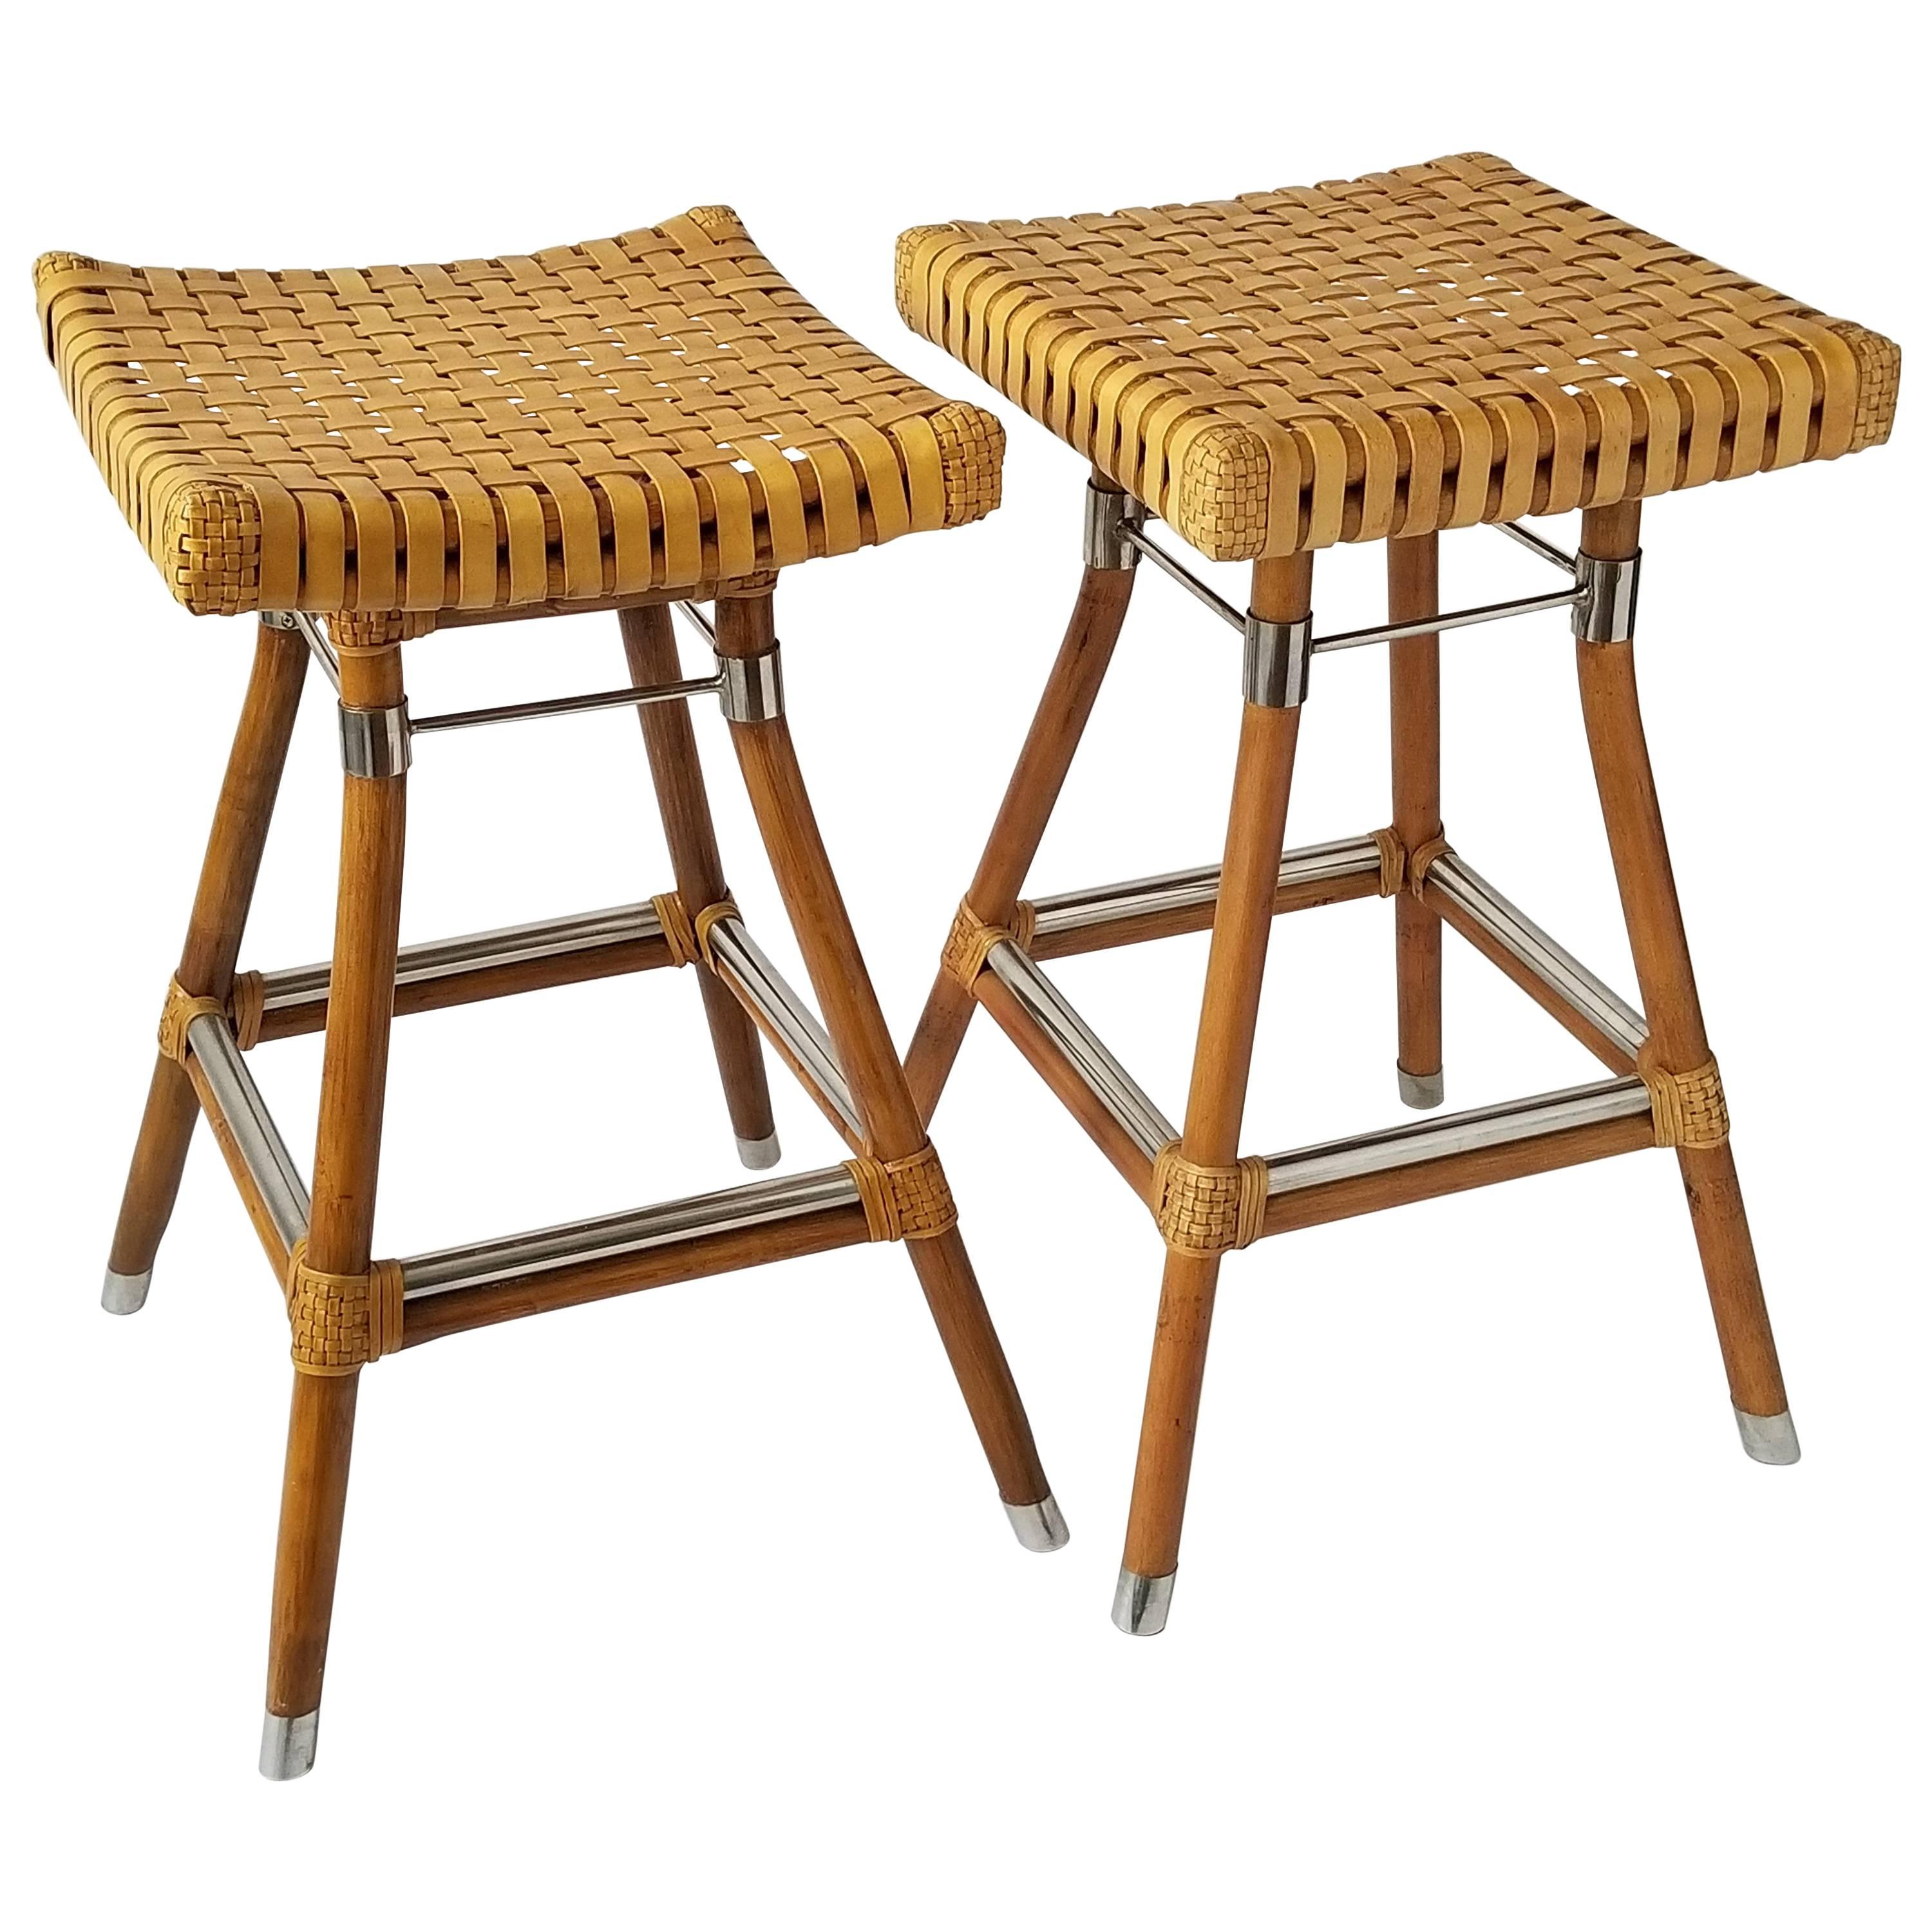 Exceptional Pair of McGuire Bamboo Bar Stool with Rawhide Seating, 1980s, USA